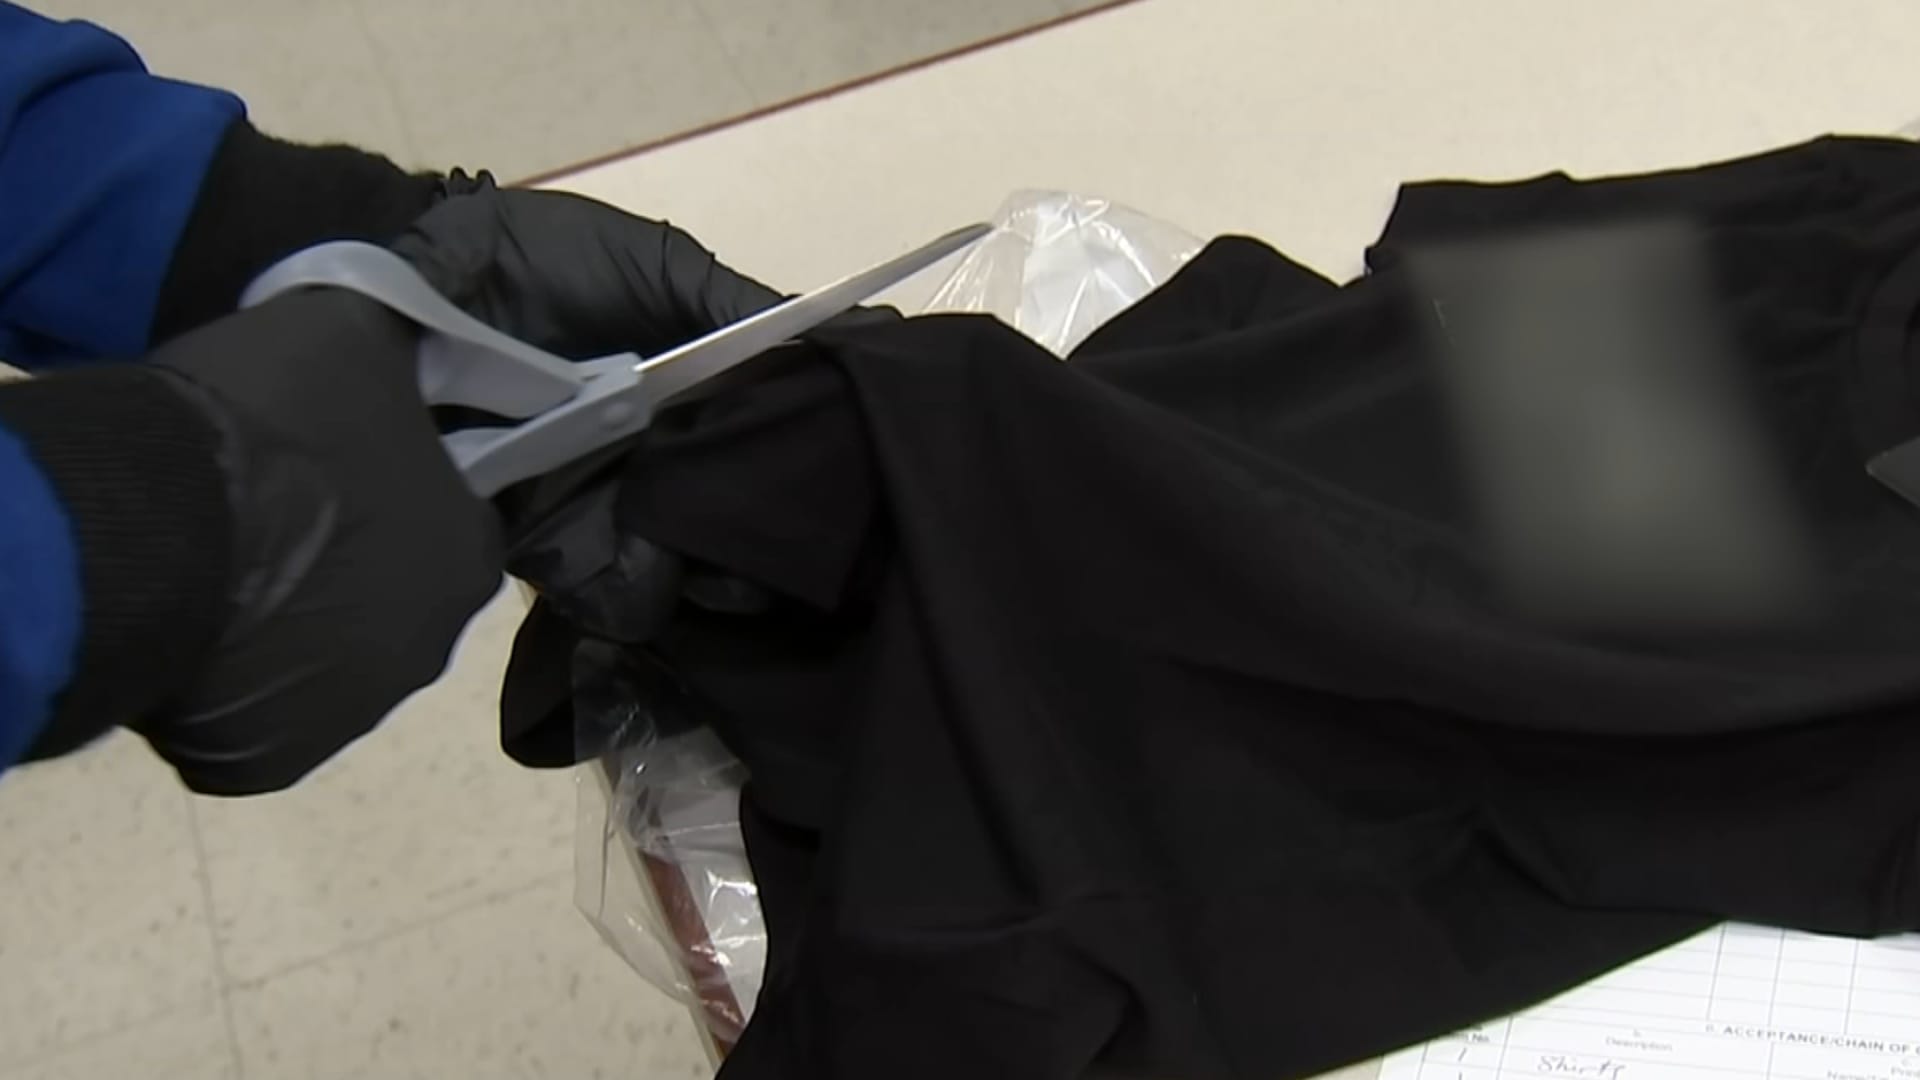 A scientist at a U.S. Customs & Border Protection lab in Newark, New Jersey, cuts a T-shirt from a well-known designer fashion label with scissors for testing.